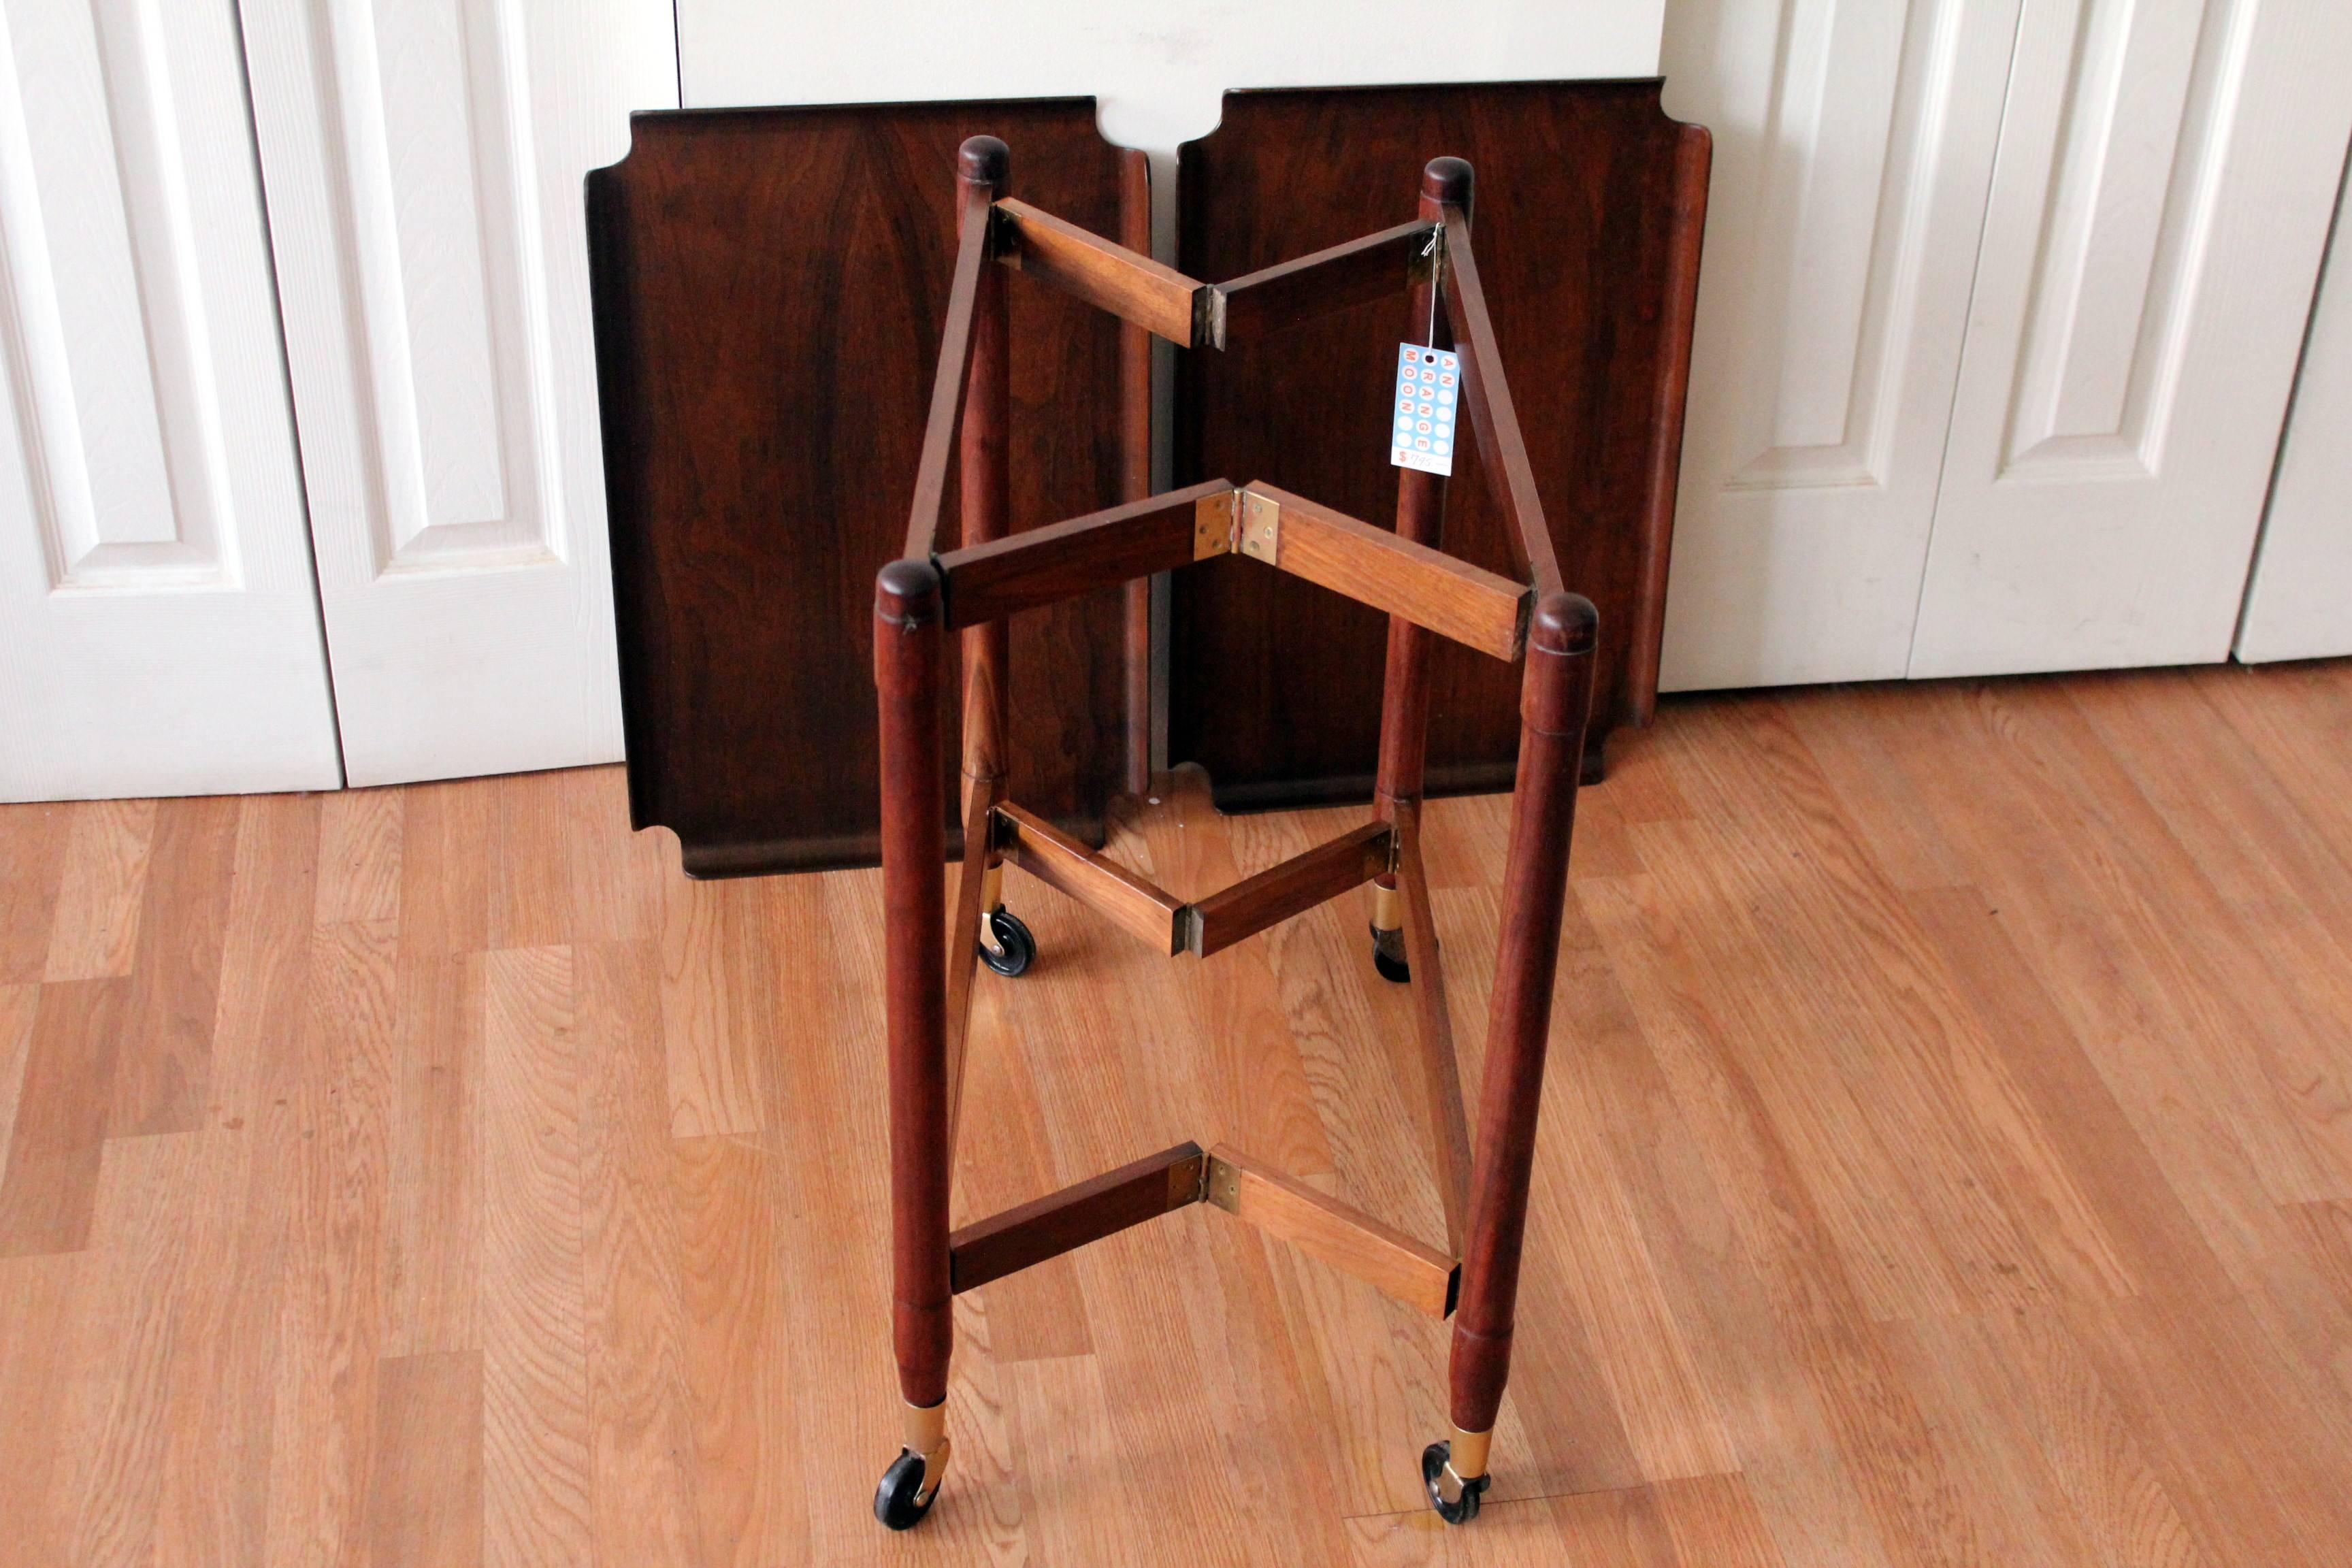 This well designed Mid-Century Modern John Stuart trolley bar cart in walnut is perfect for entertaining. Notice how beautifully it folds for storage? The cart sits atop wheels with brass caps and hinges. It also boasts removable trays perfect for